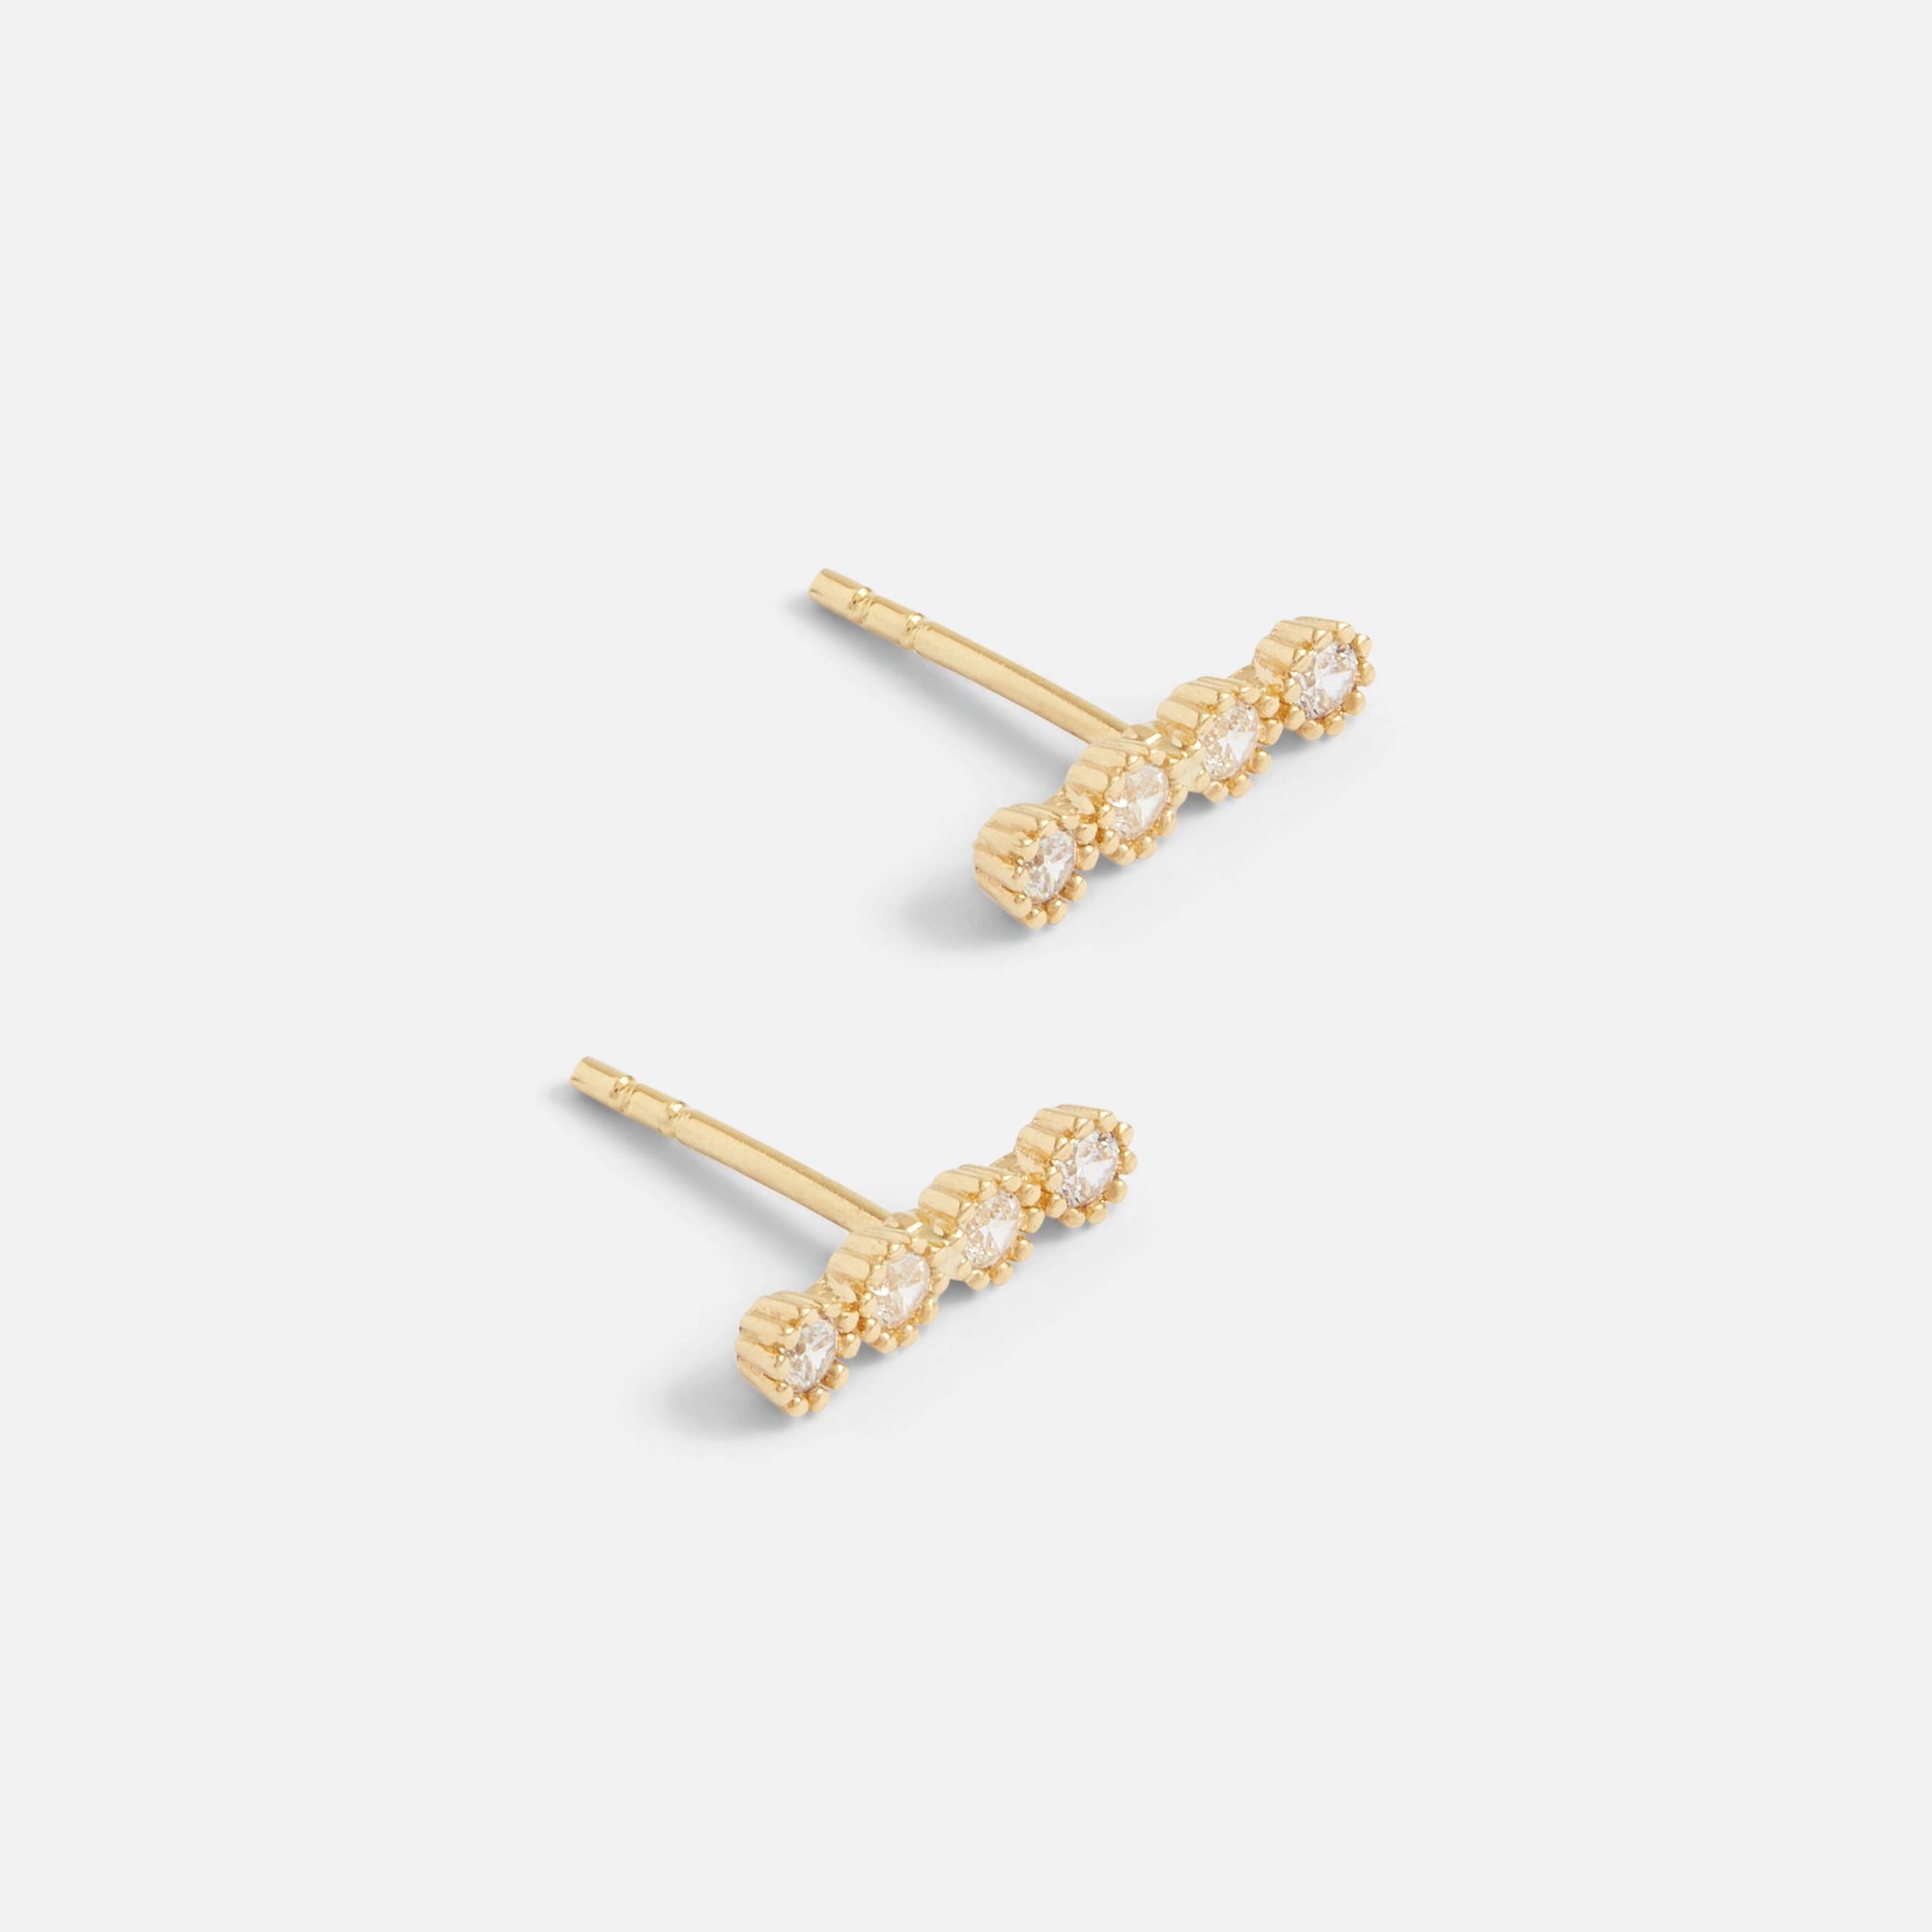 10k yellow gold earrings with four stones